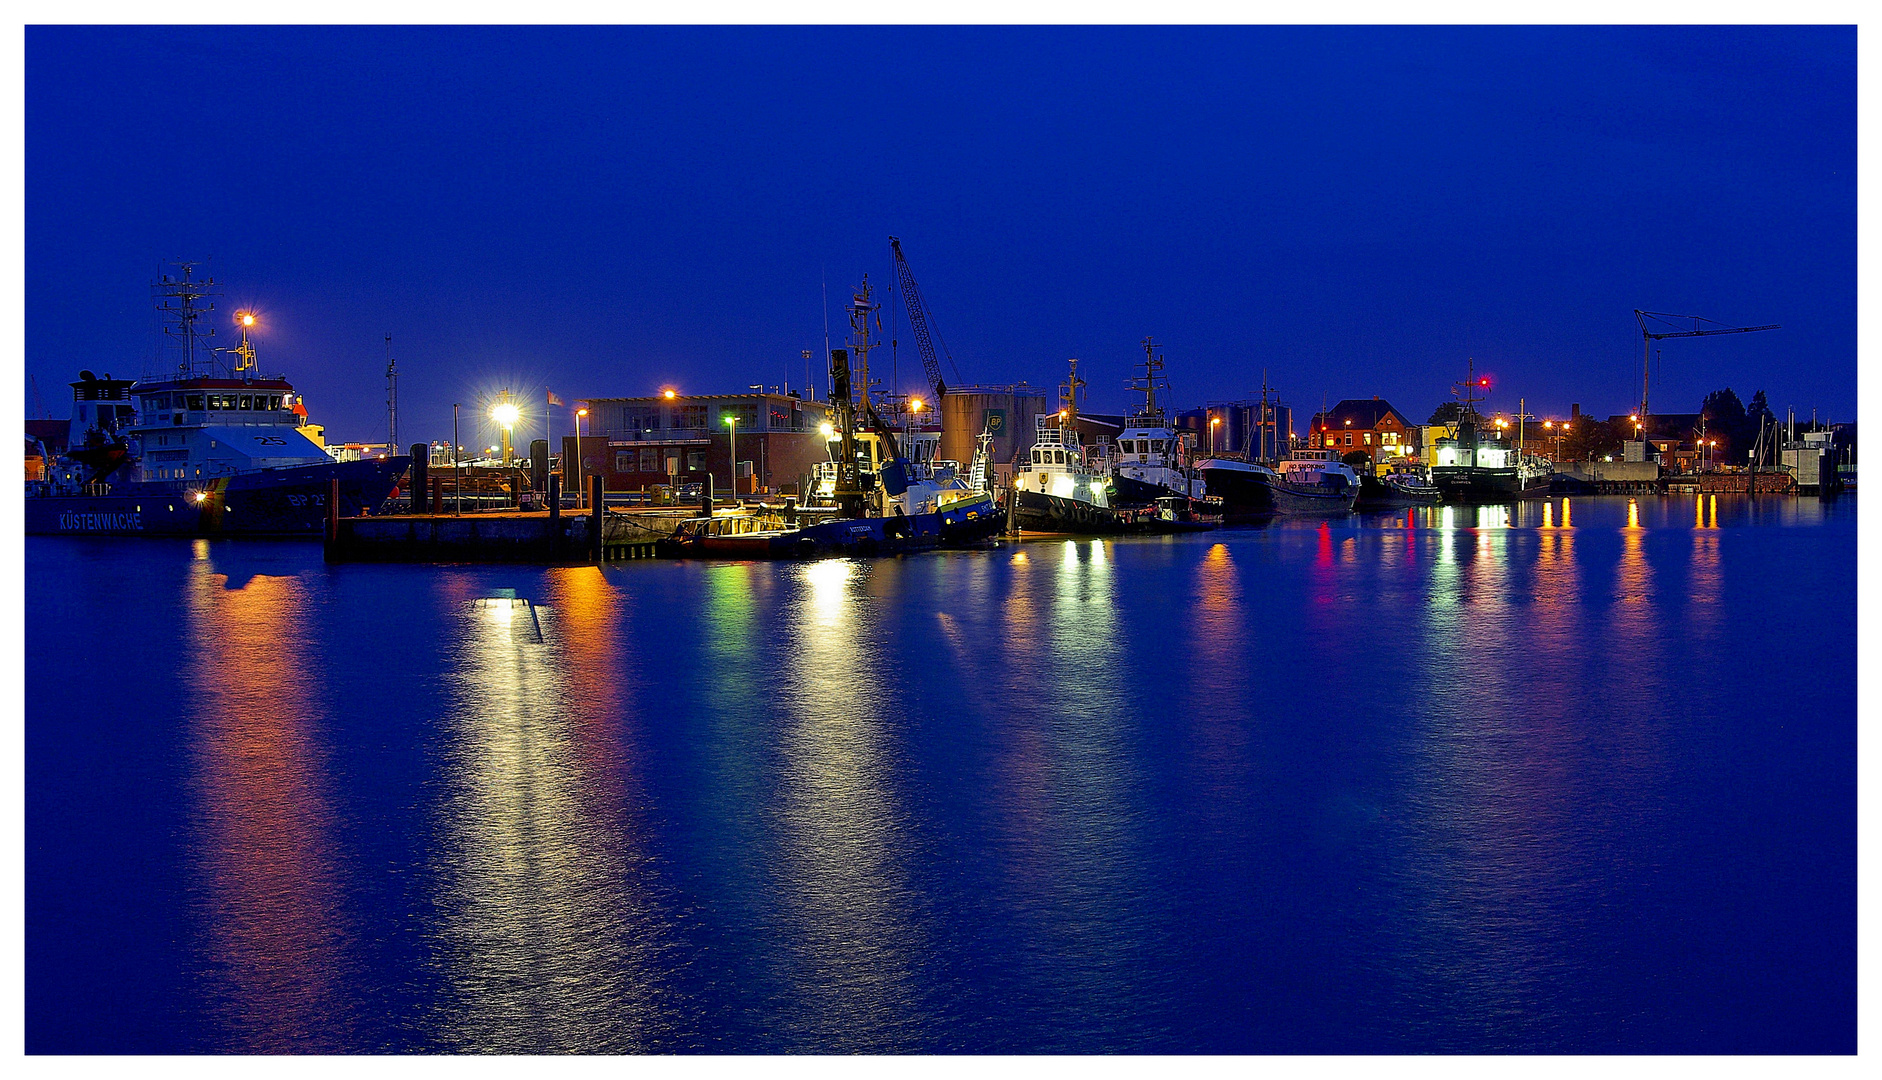 Cuxhaven at night